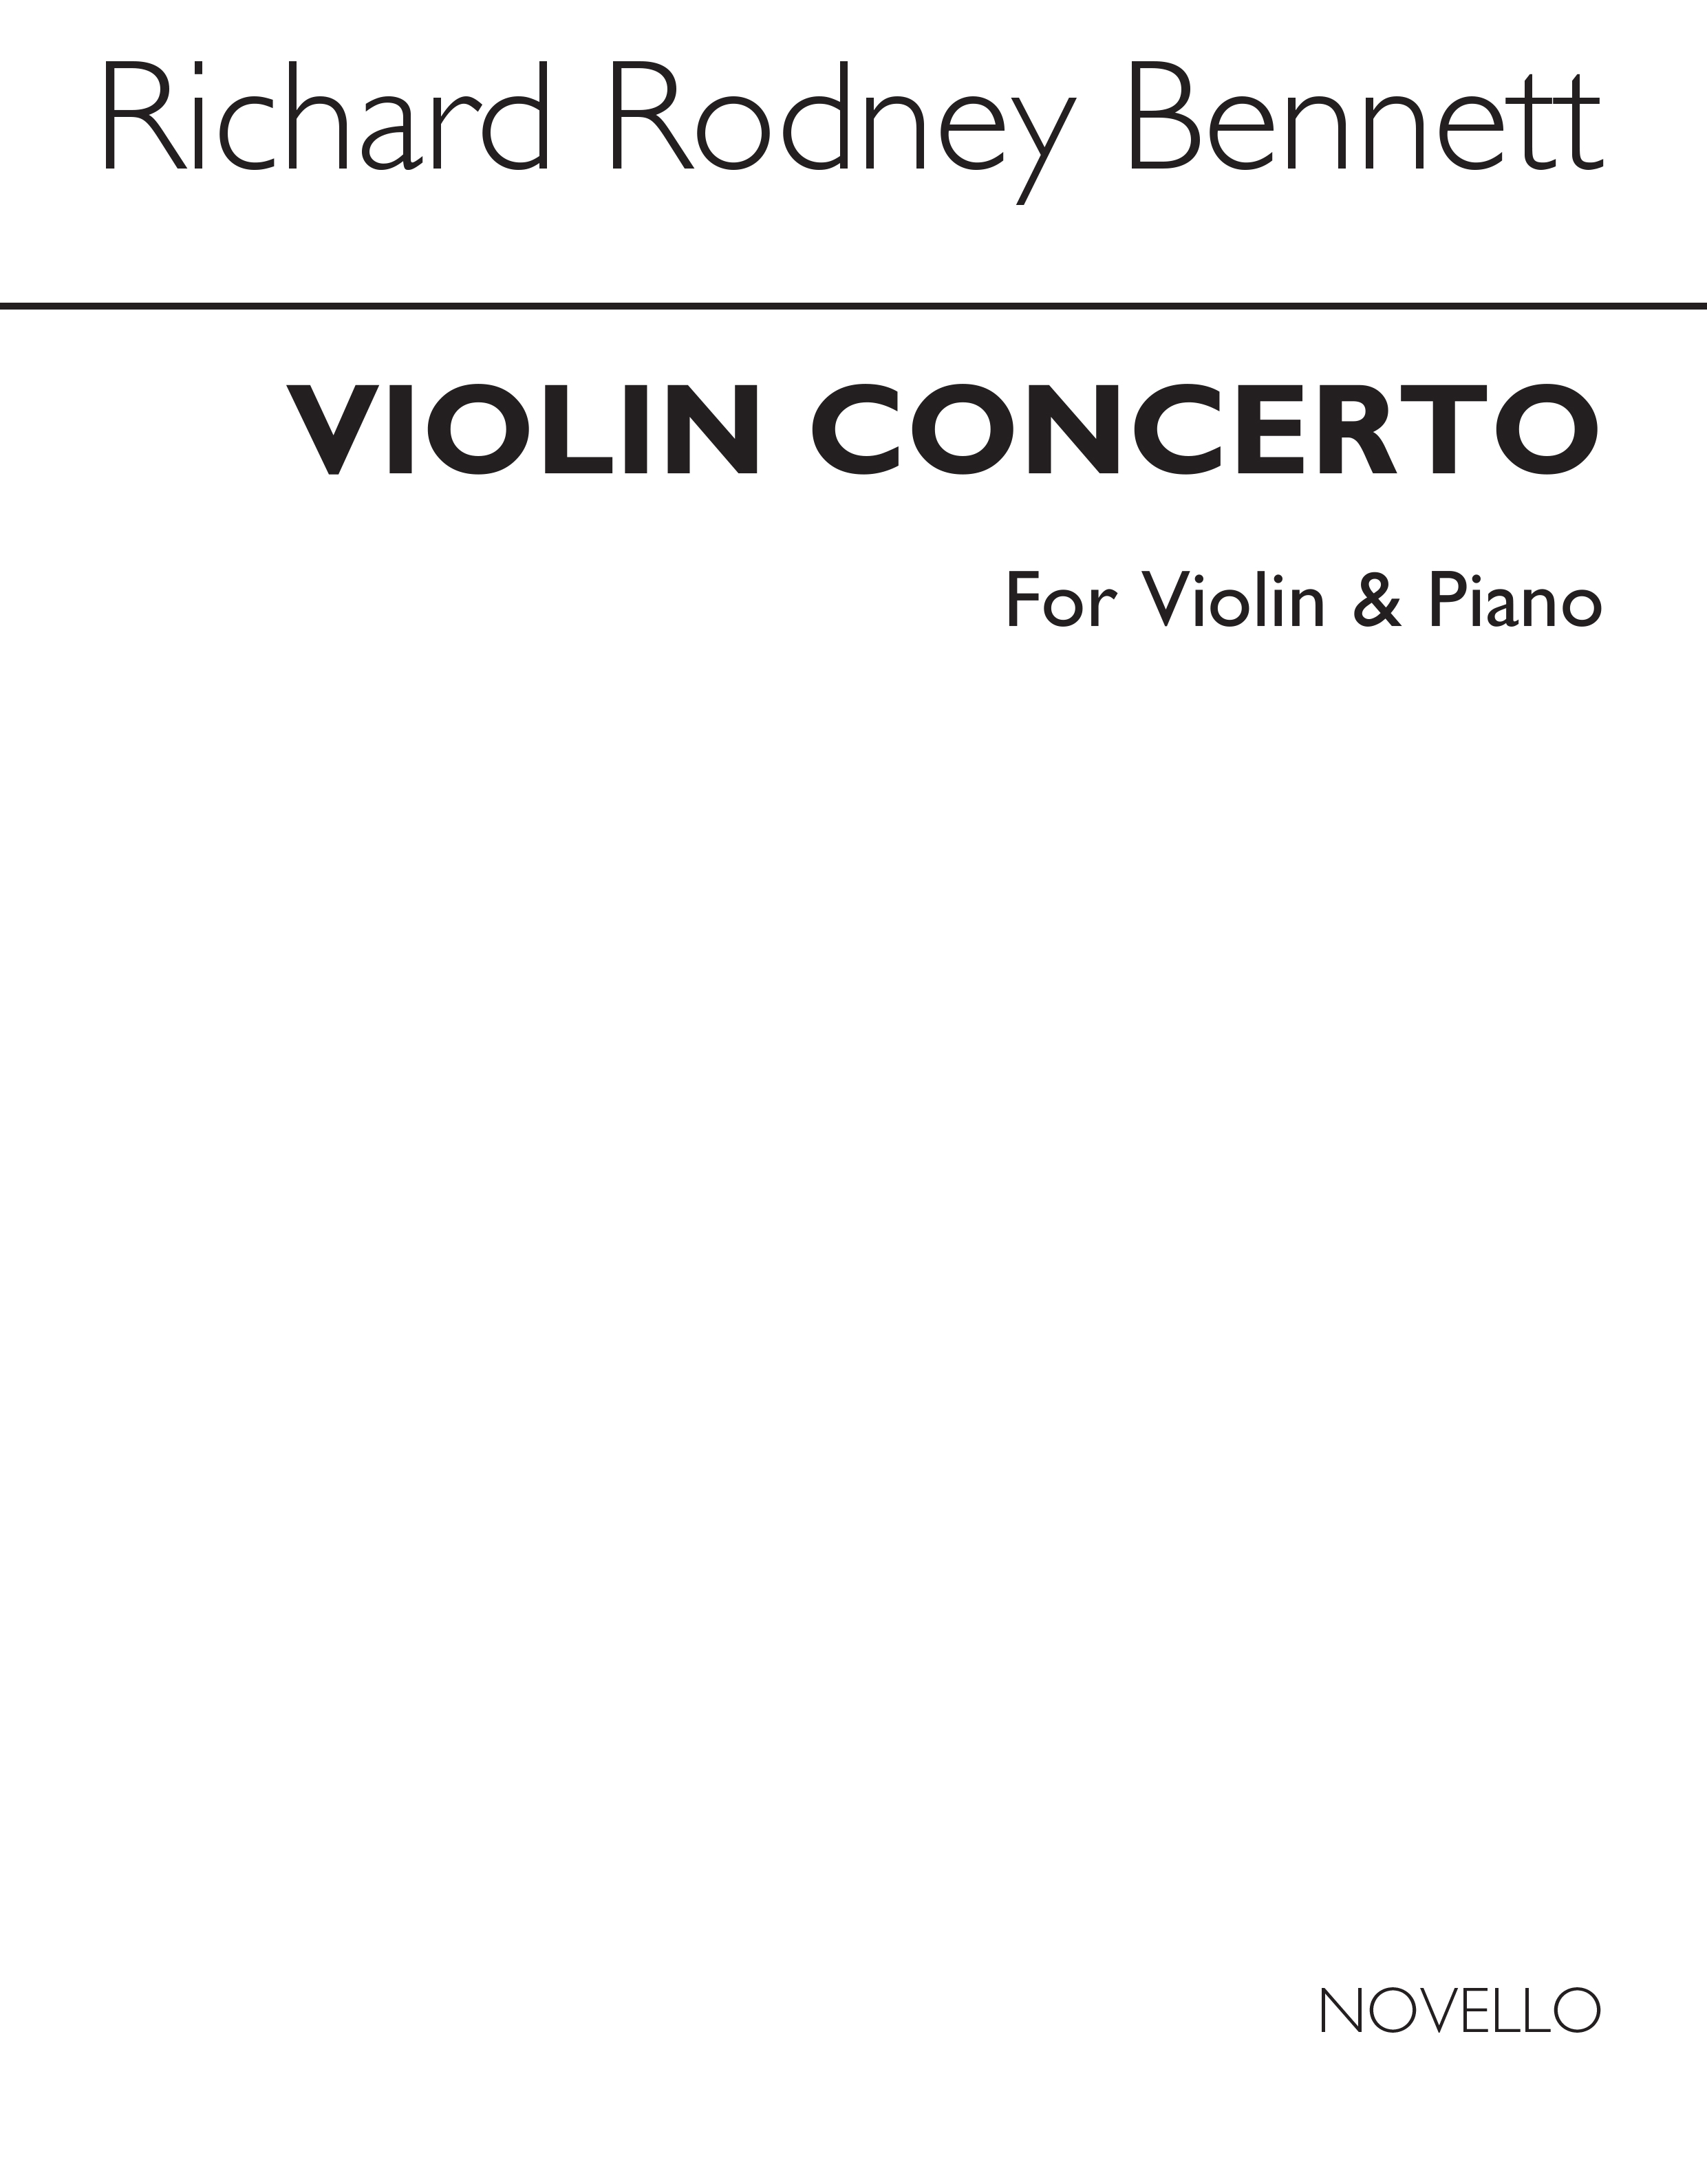 RR Bennett: Concerto For Violin (Violin Part and Piano Reduction)